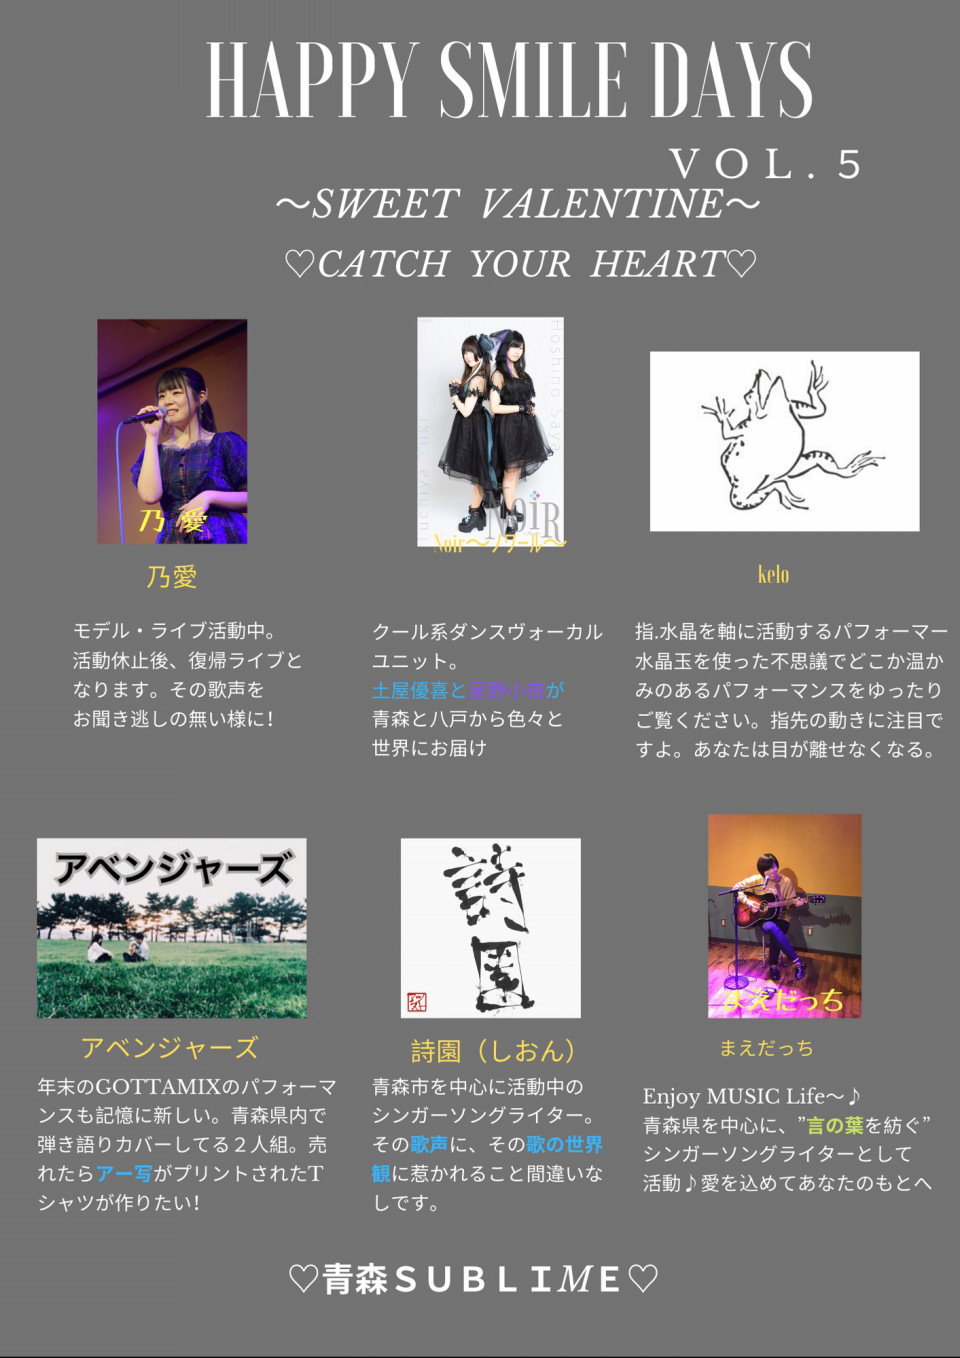 Happy Smile Days Vol 5 Sweet Valentin Catch Your Heart Happy Smile Days はぴすま